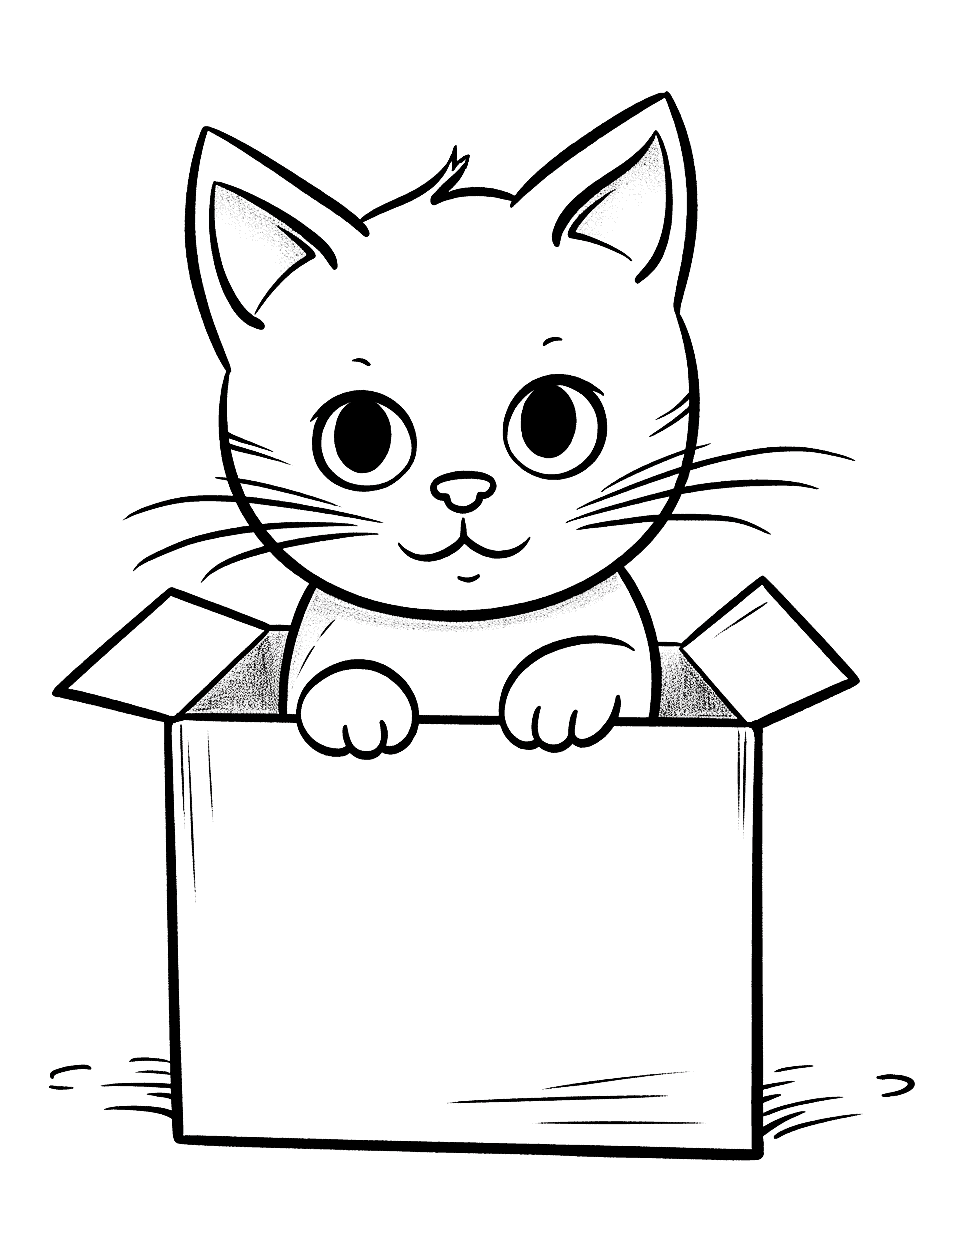 Preschool Coloring Page of a Cat in Box - A cute and simple image of a cat popping out of a cardboard box.